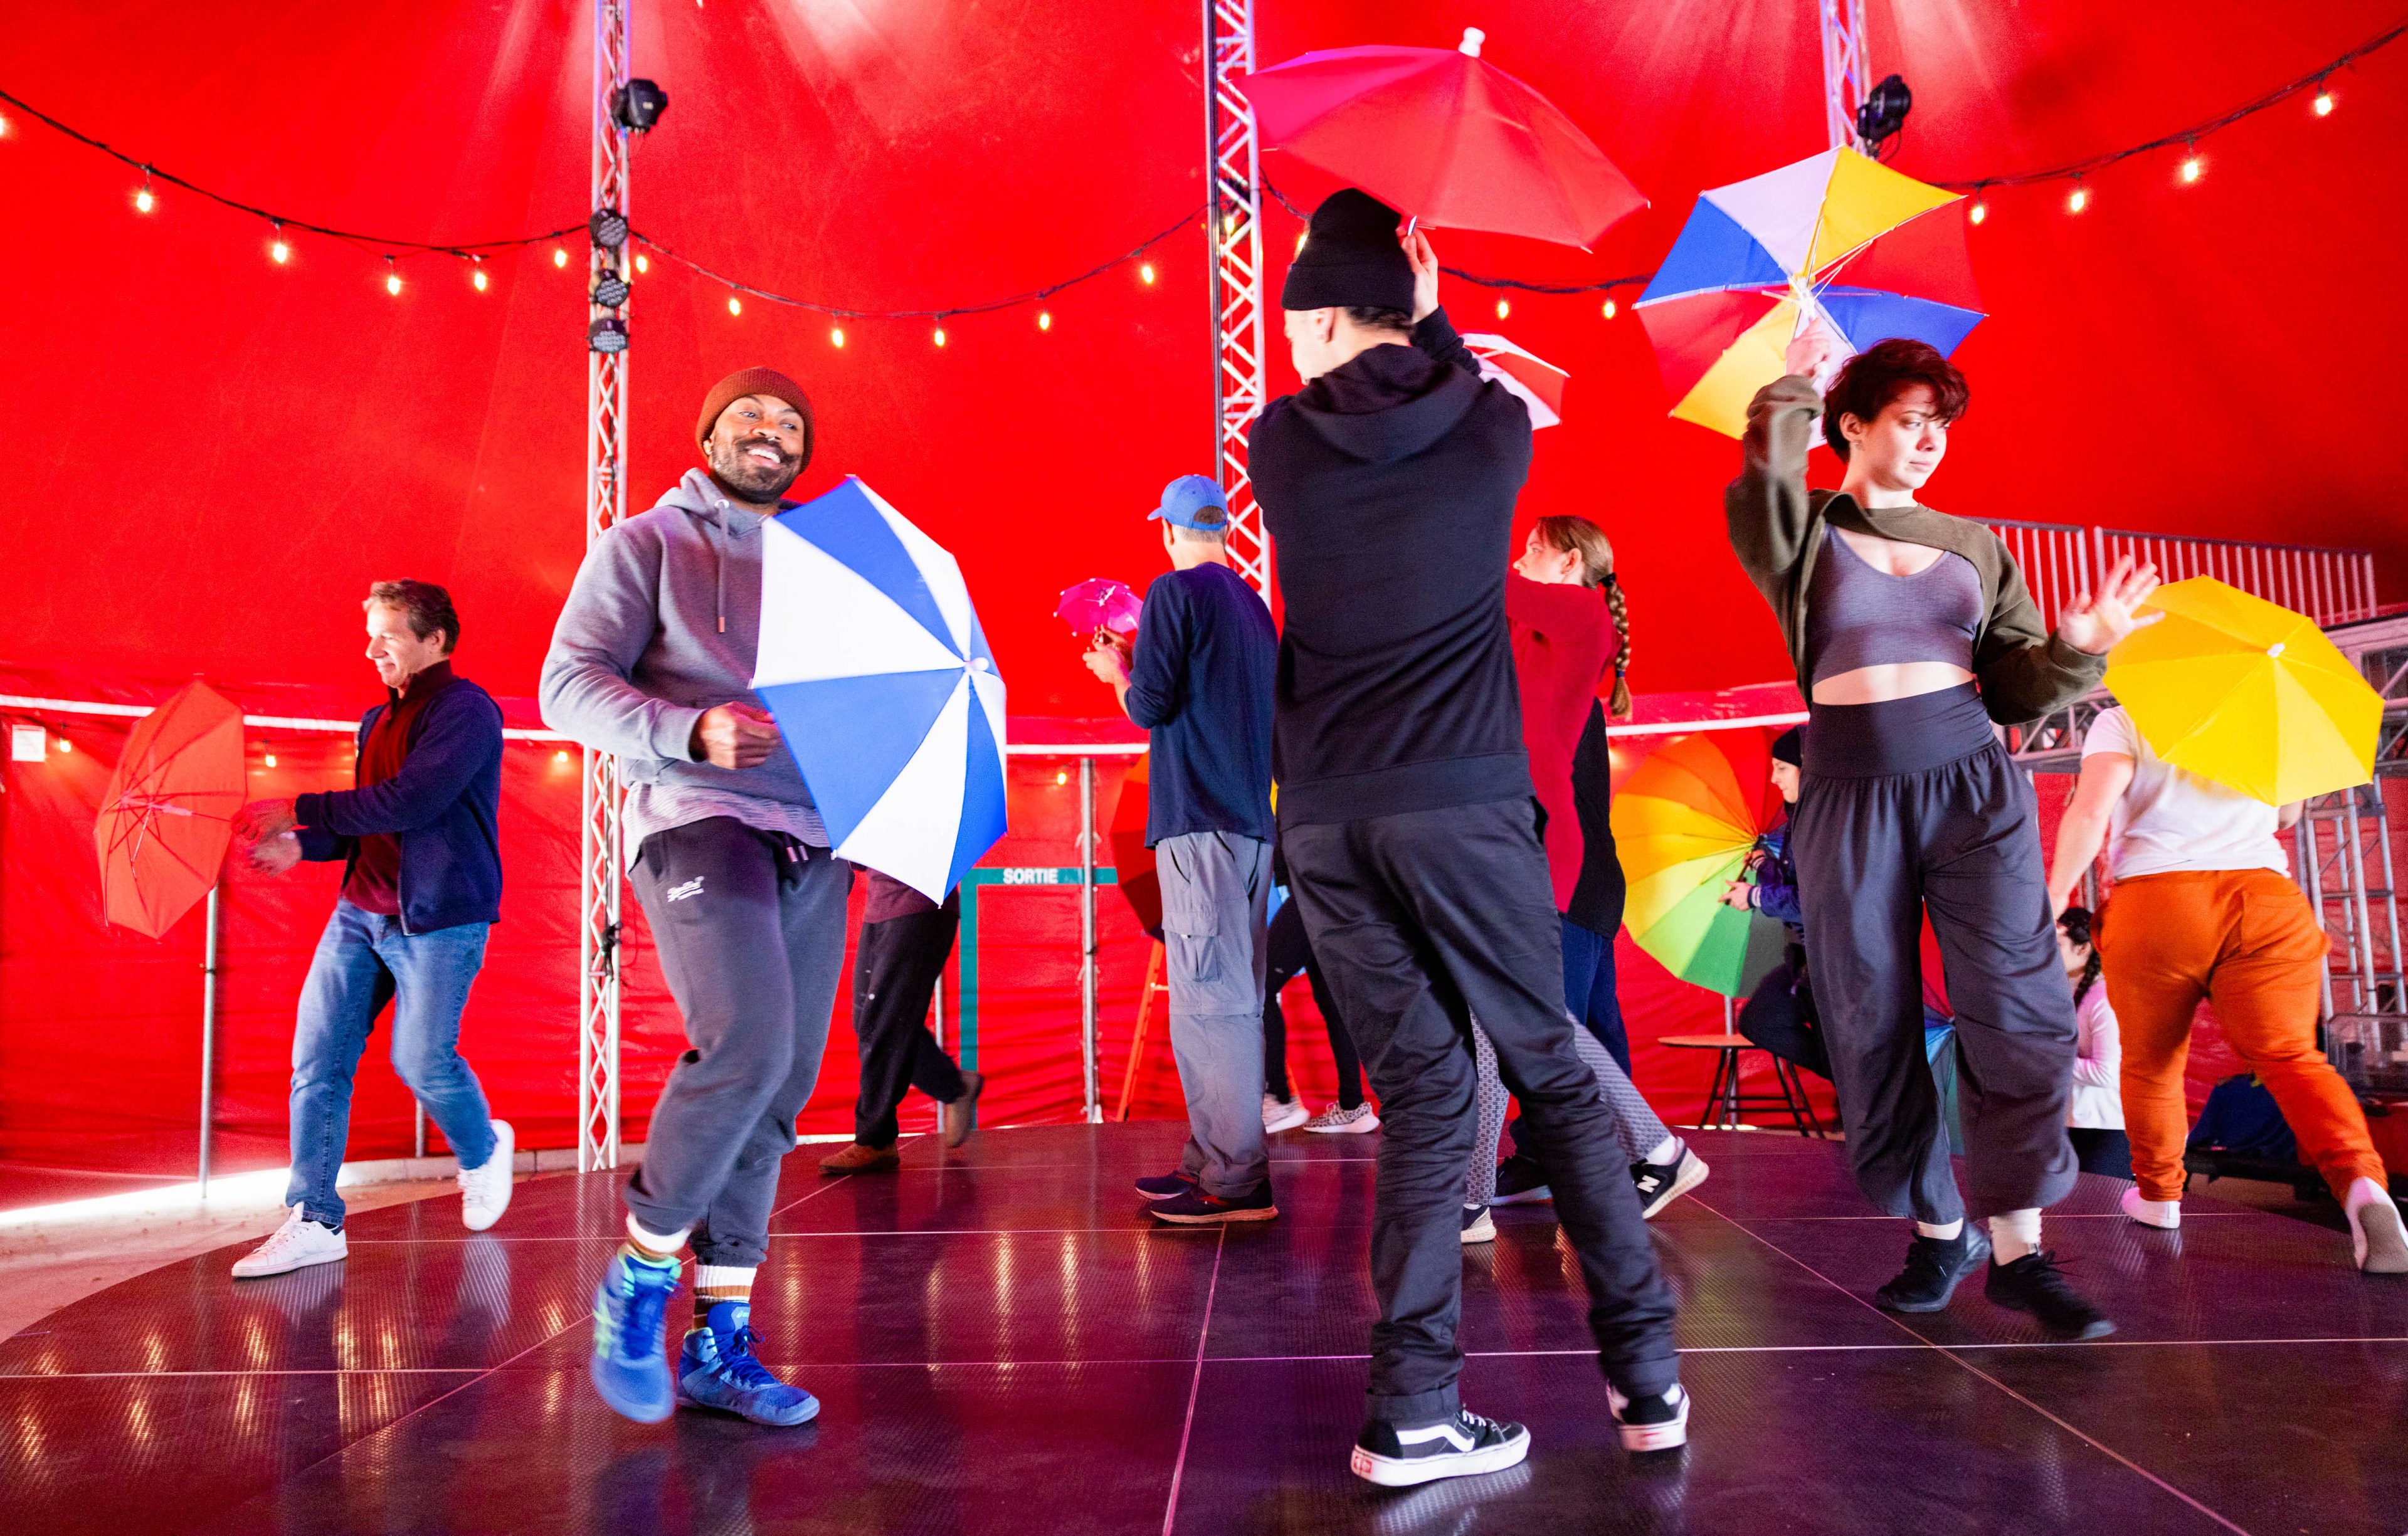 People practice with umbrellas on stage.